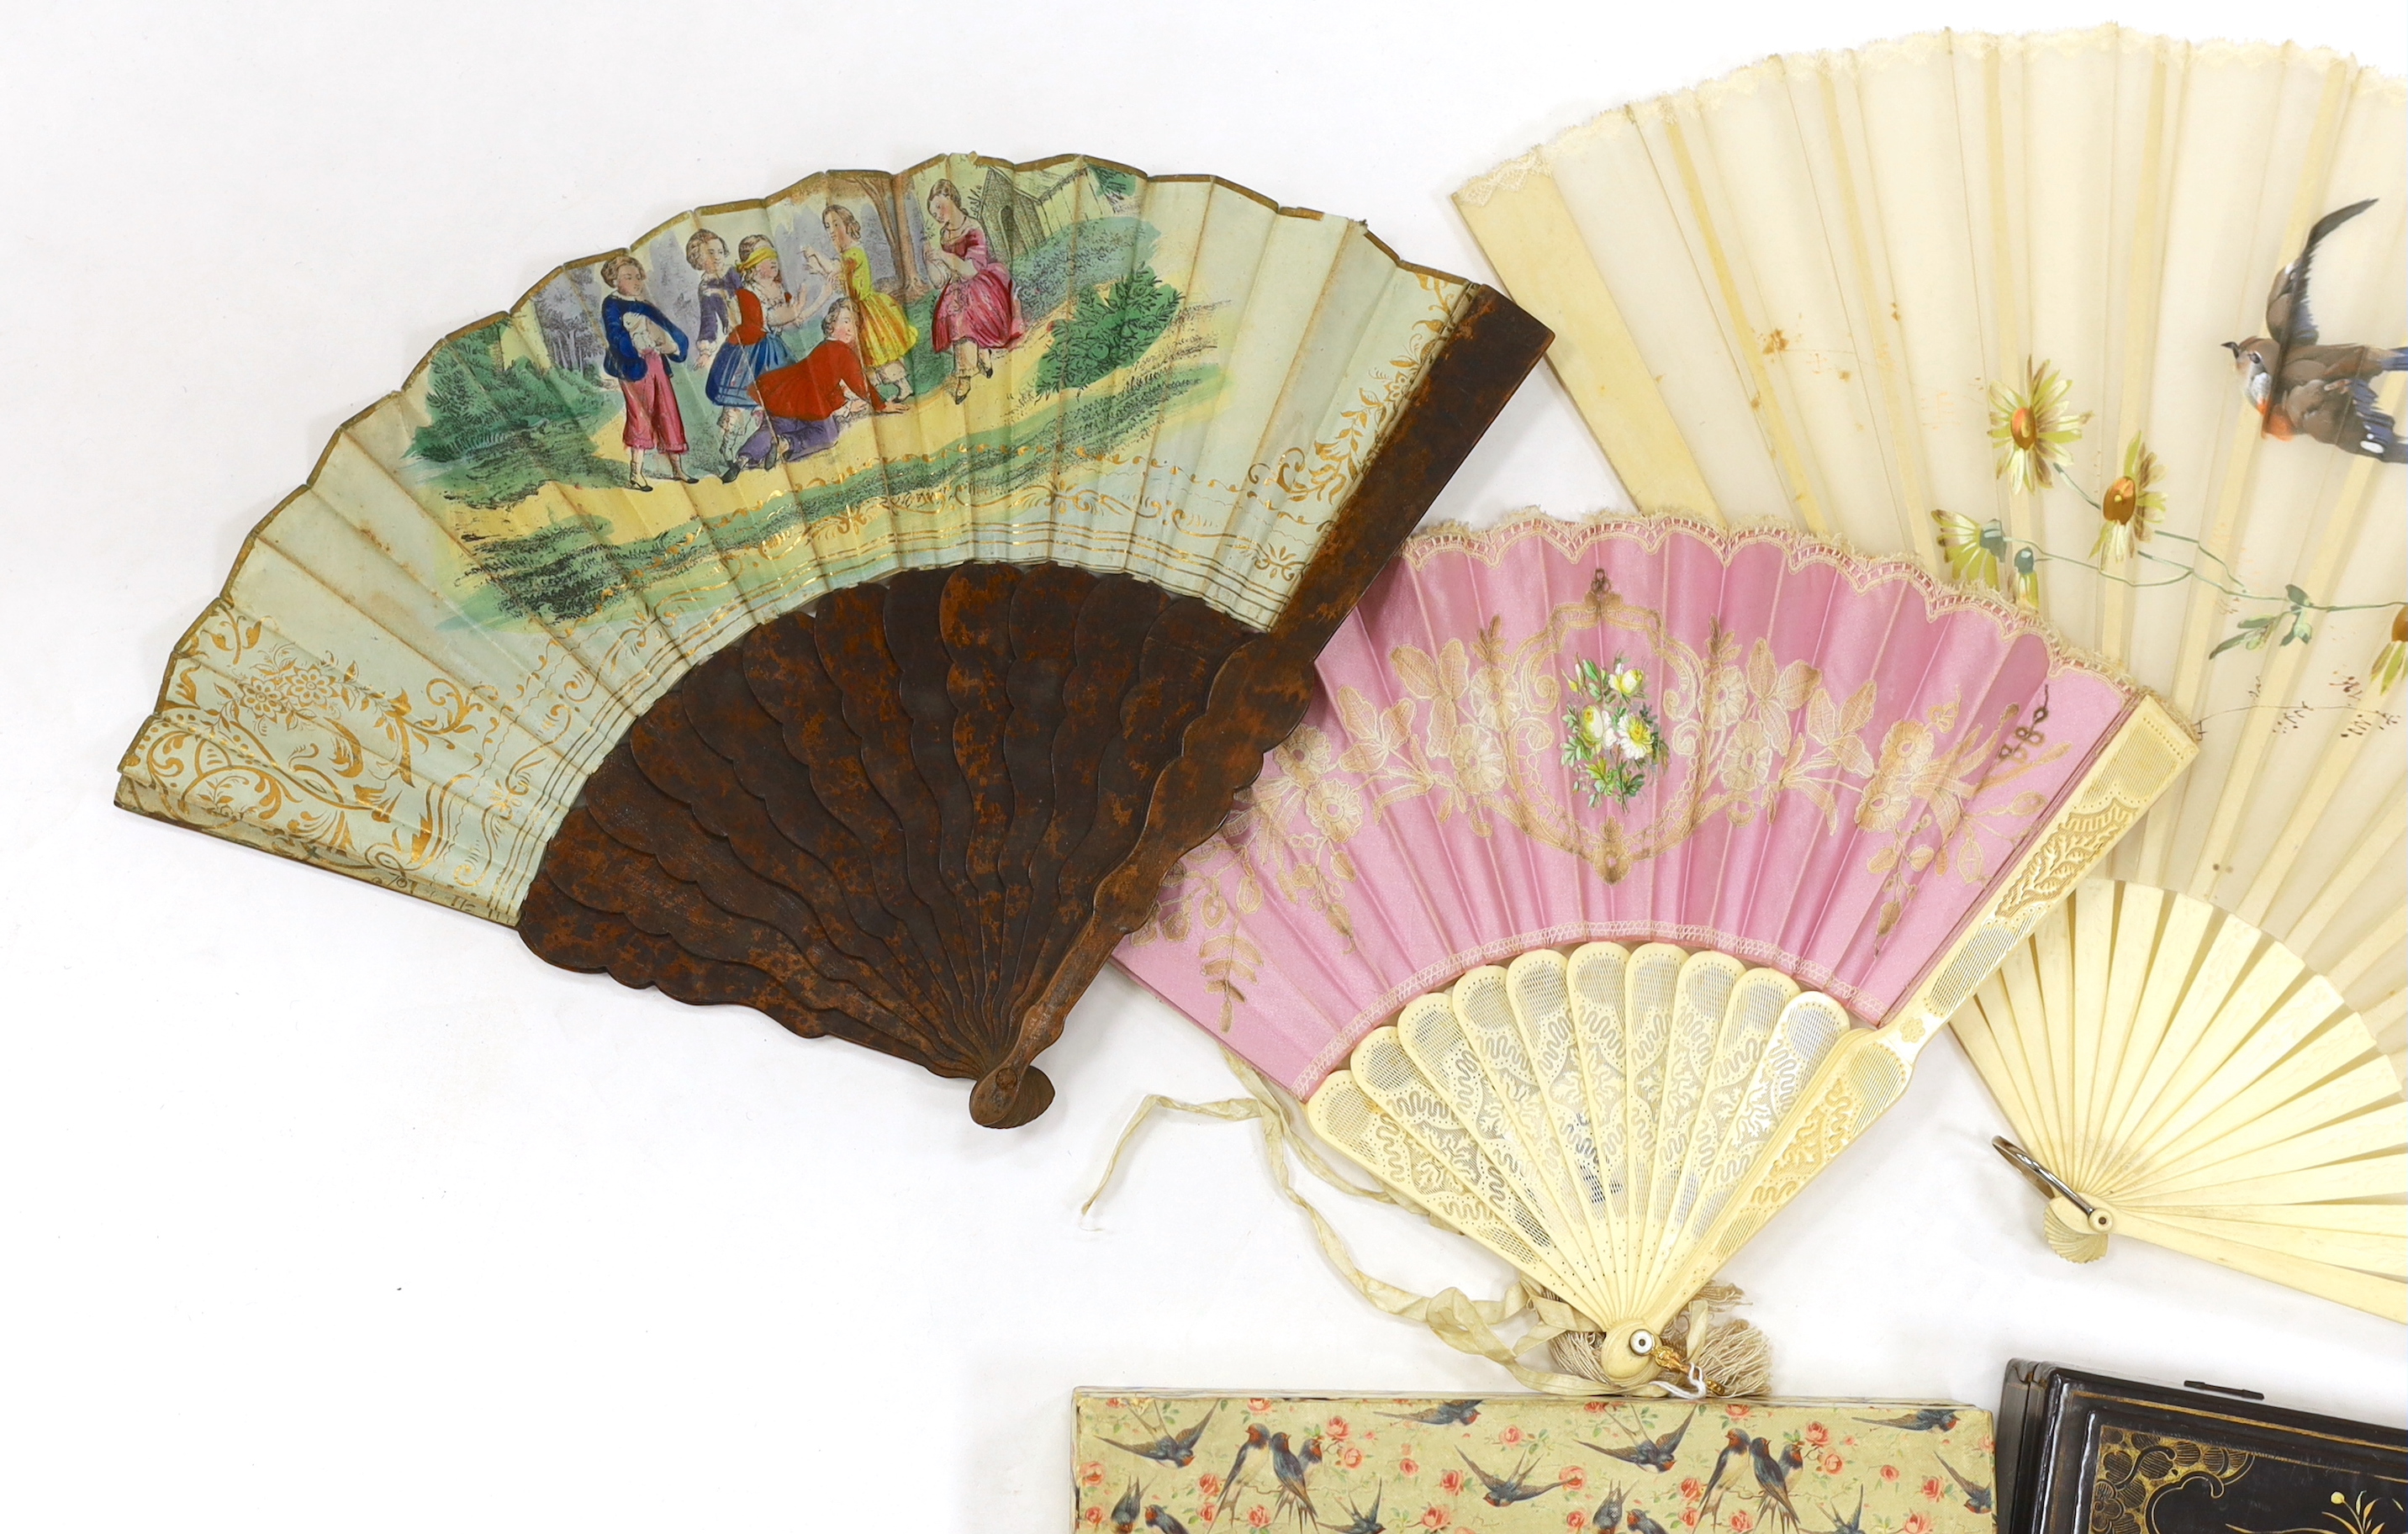 A Chinese lacquer fan box and a paper covered fan box, two Victorian fans painted with scenes of children playing, a gauze painted fan and another with bobbin lace appliqué, lacquer box 32cm wide x 4.5cm high